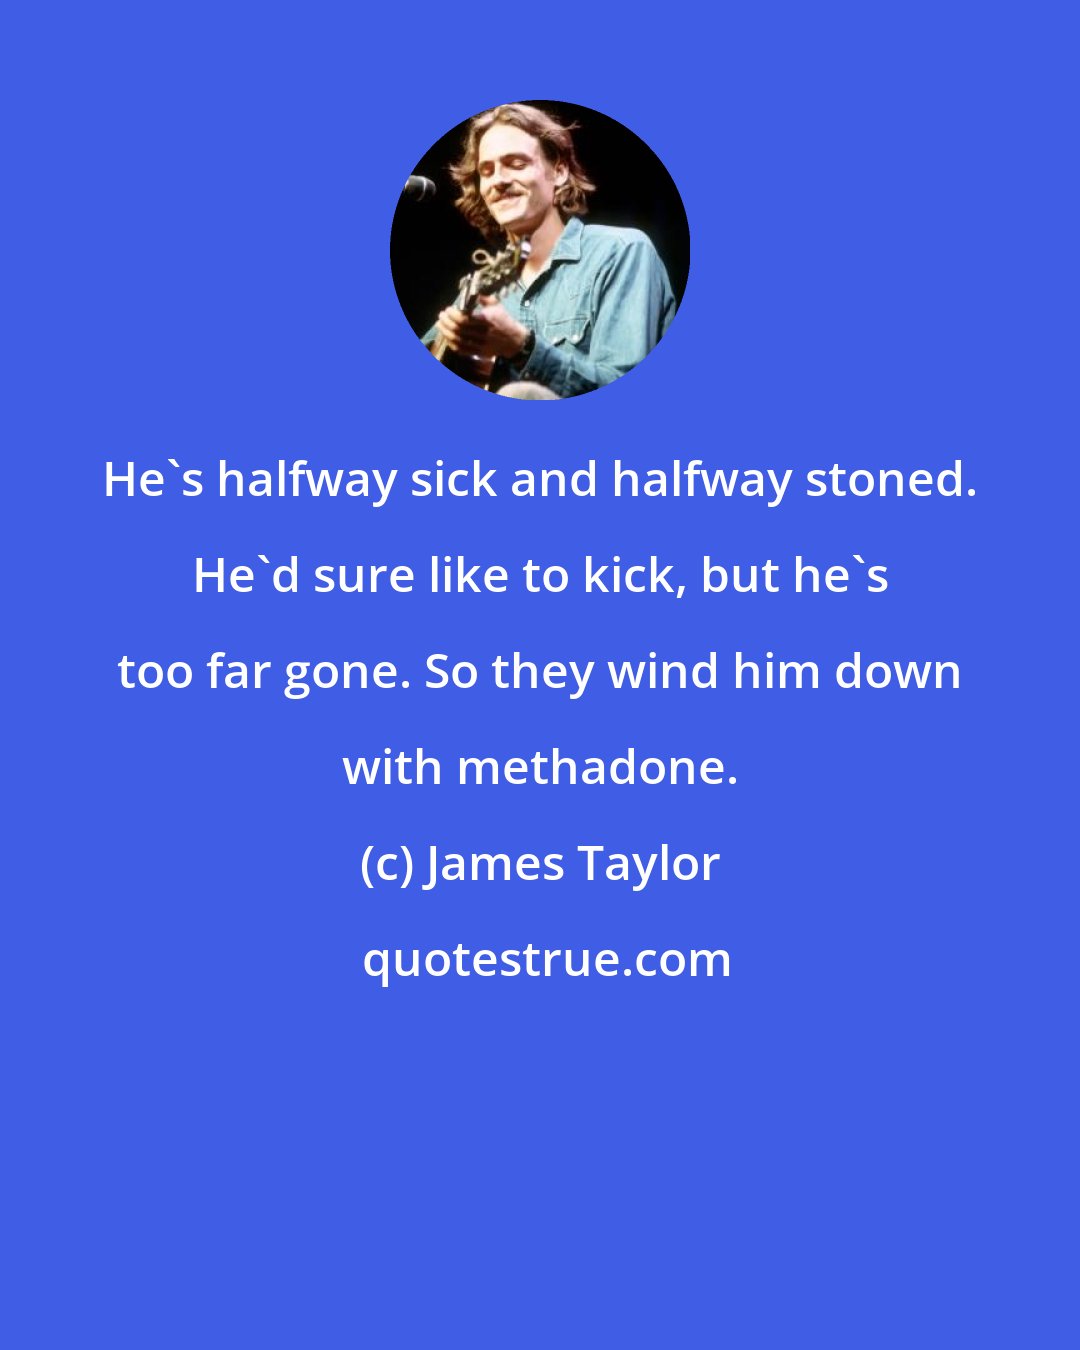 James Taylor: He's halfway sick and halfway stoned. He'd sure like to kick, but he's too far gone. So they wind him down with methadone.